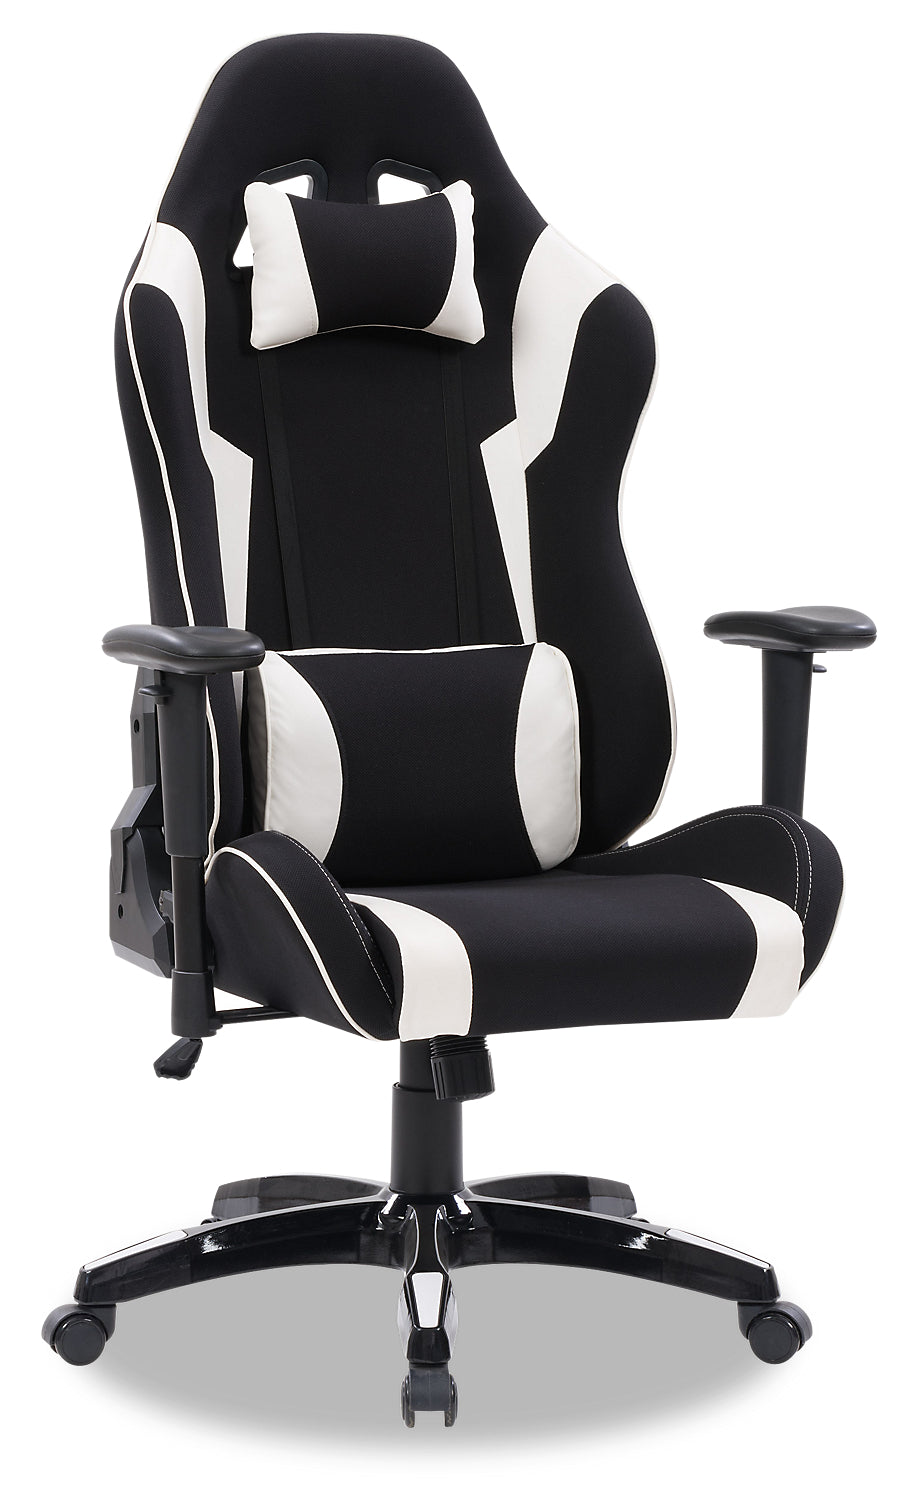 24 Gaming Chair Black Friday Canada Houzz Table